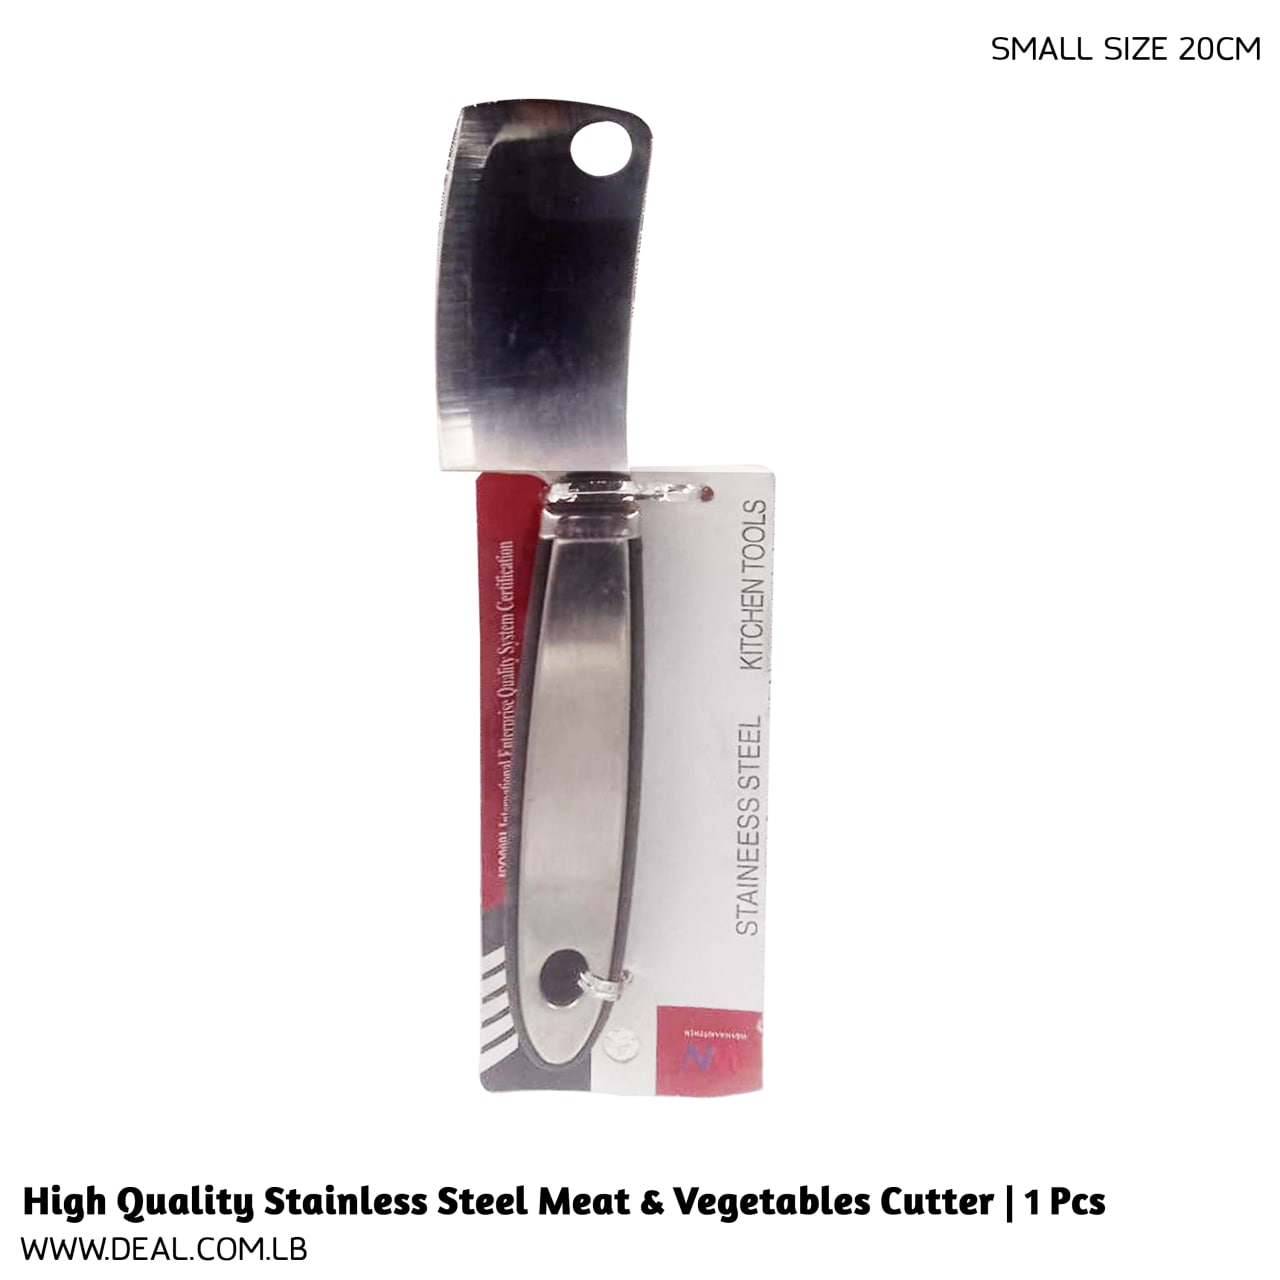 High+Quality+Stainless+Steel+Meat+%26+Vegetables+Cutter+%7C+1+Pcs